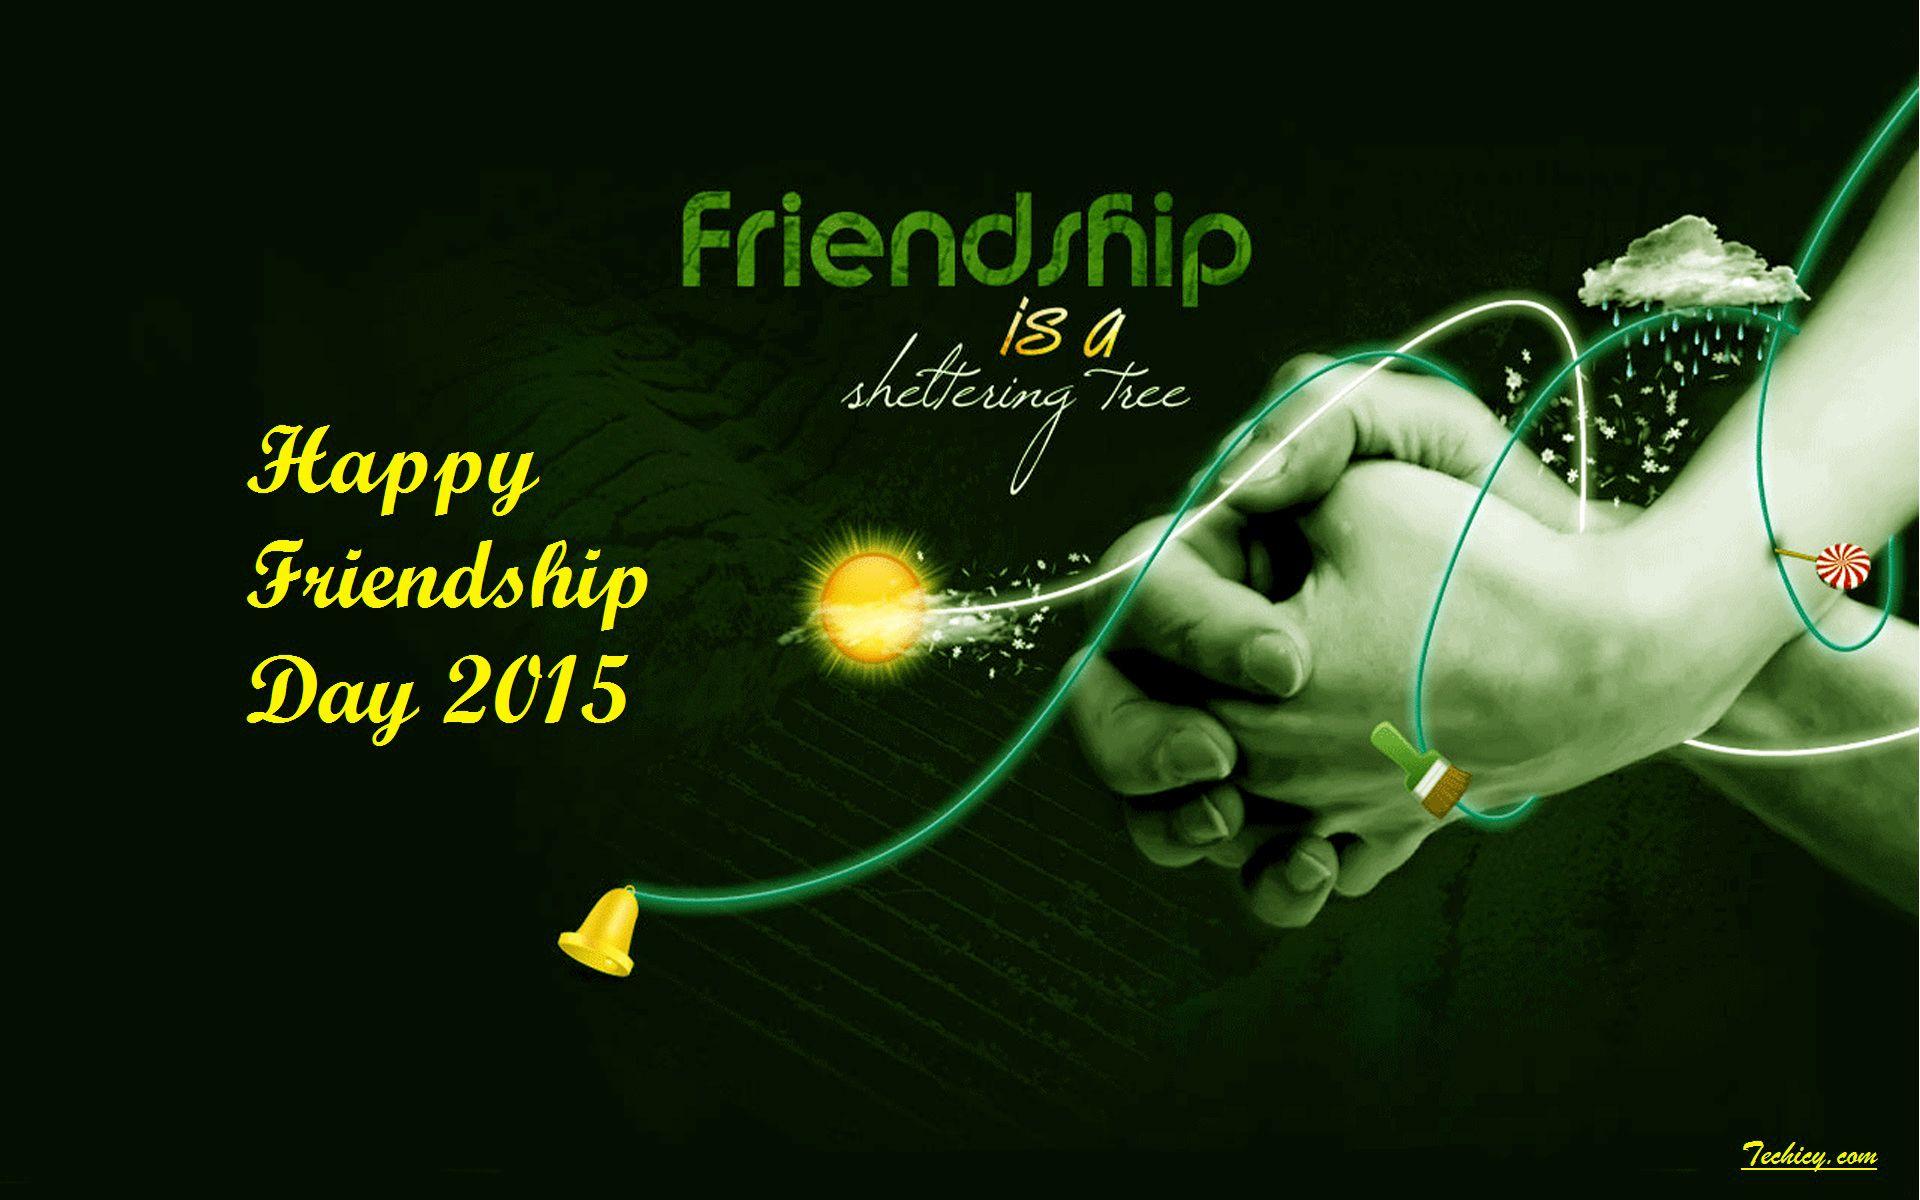 Happy Friendship Day HD Wallpaper Quotes, Wishes, Image